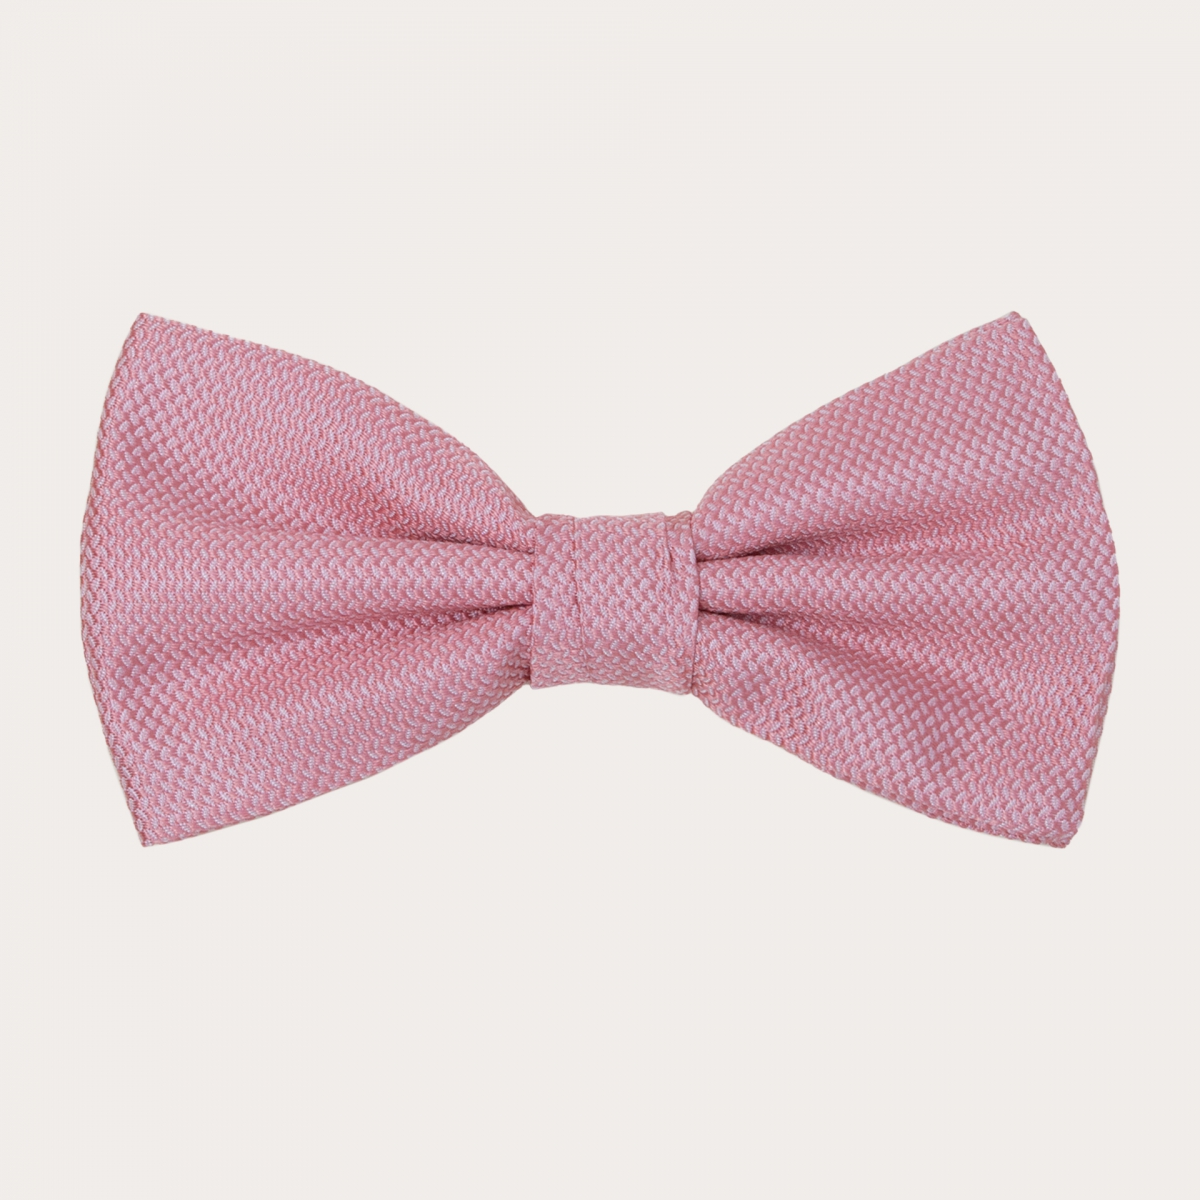 Brucle Silk Pre-tied Bow Tie pink made in italy